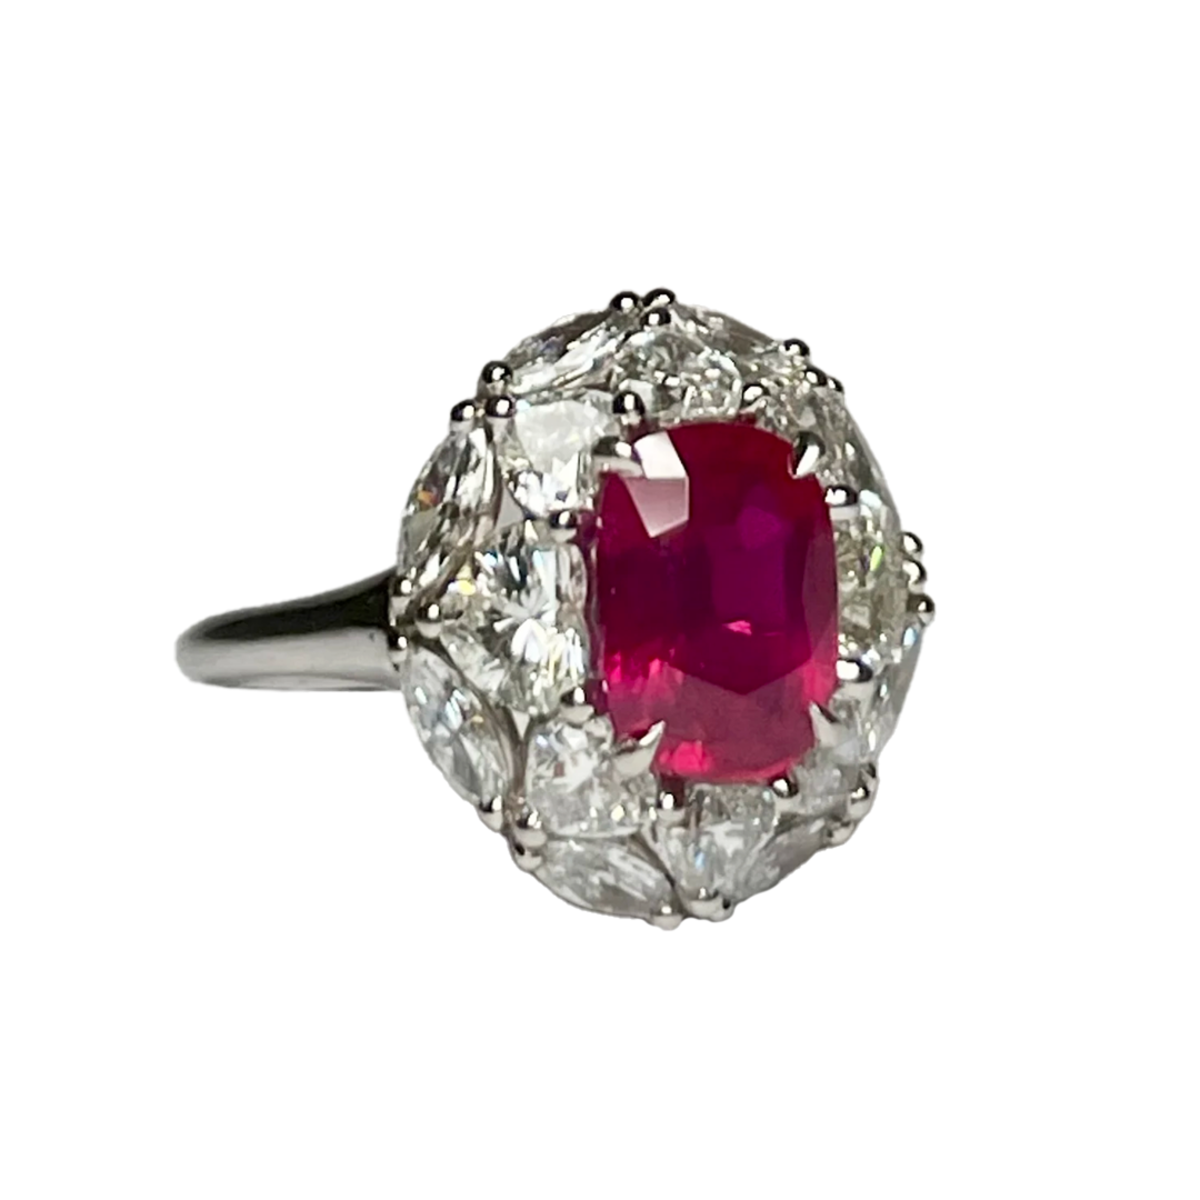 Post-1980s Platinum Ruby & Diamond Ring front and side